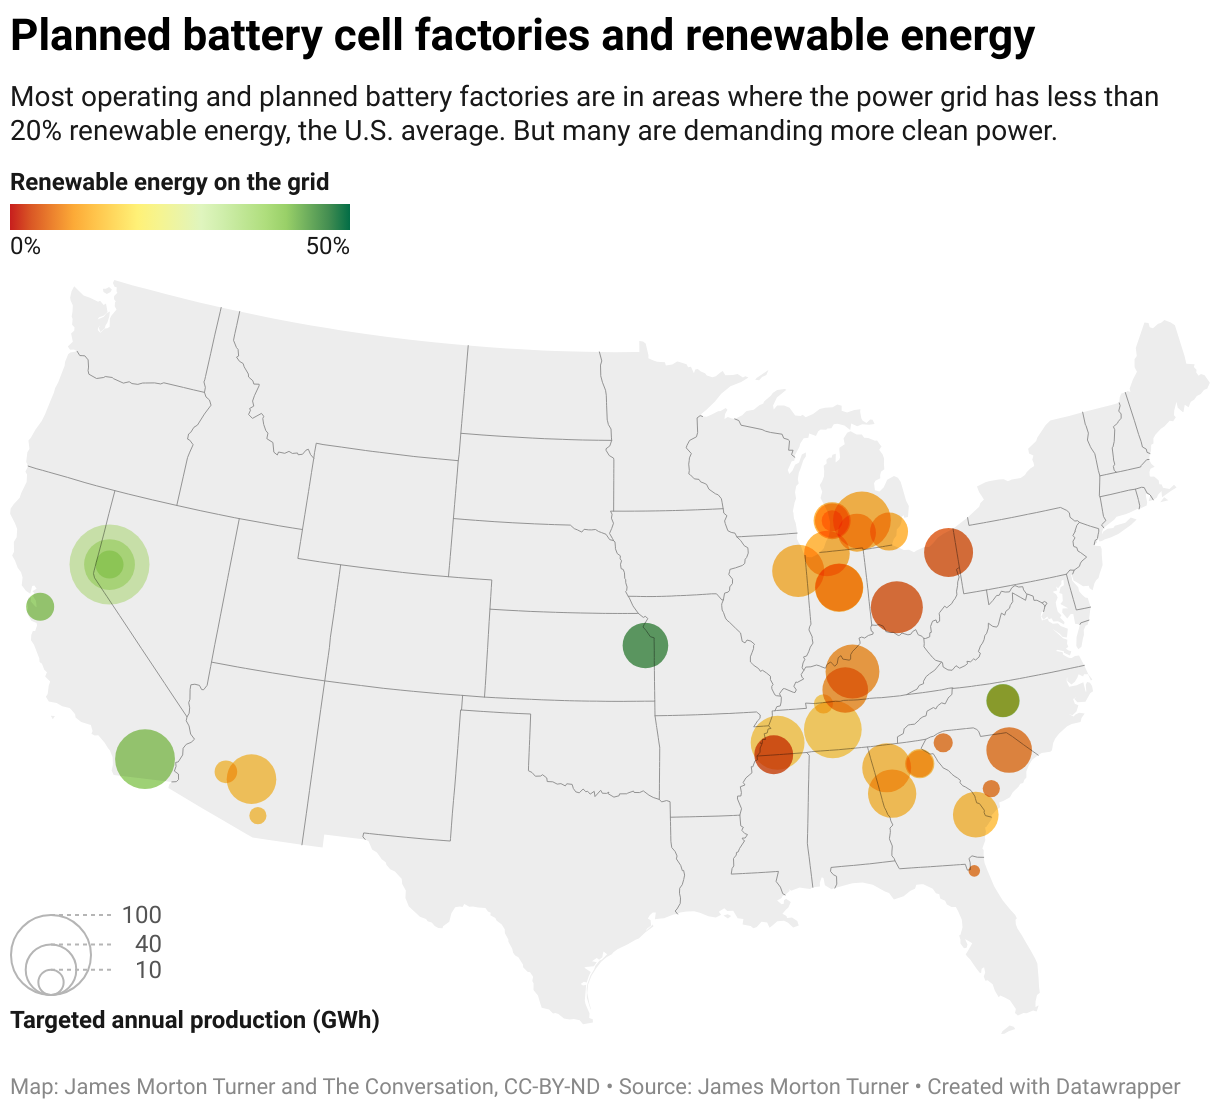 Planned battery cell factories and renewable energy